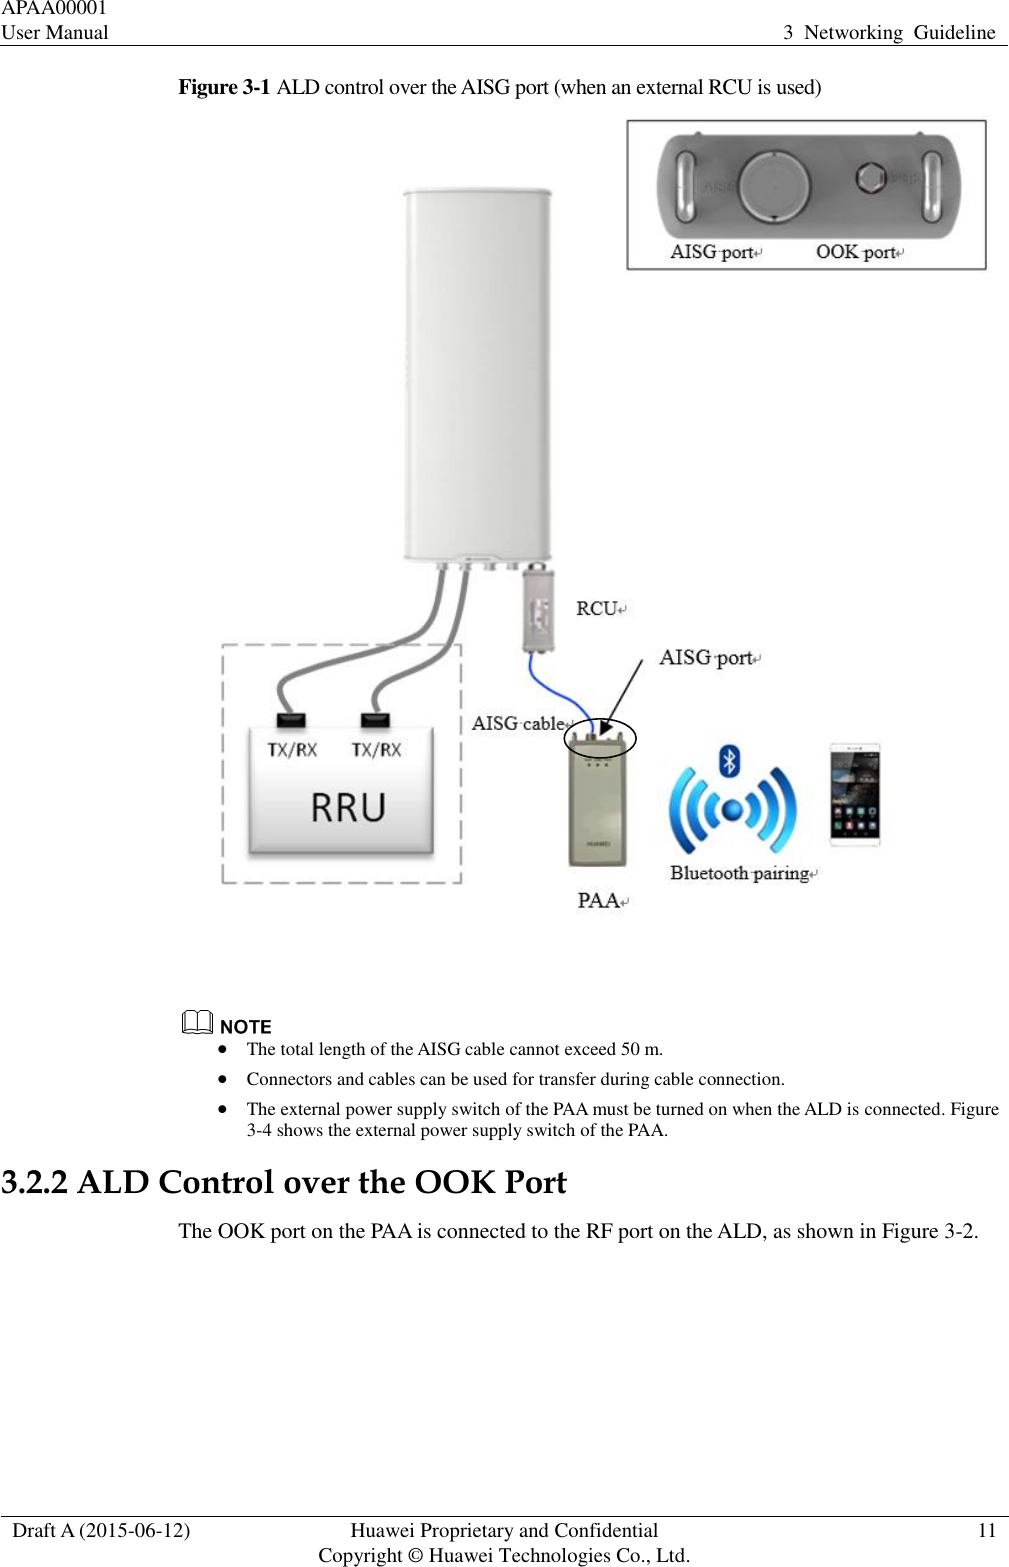 APAA00001 User Manual 3  Networking  Guideline  Draft A (2015-06-12) Huawei Proprietary and Confidential           Copyright © Huawei Technologies Co., Ltd. 11  Figure 3-1 ALD control over the AISG port (when an external RCU is used)     The total length of the AISG cable cannot exceed 50 m.    Connectors and cables can be used for transfer during cable connection.    The external power supply switch of the PAA must be turned on when the ALD is connected. Figure 3-4 shows the external power supply switch of the PAA.   3.2.2 ALD Control over the OOK Port The OOK port on the PAA is connected to the RF port on the ALD, as shown in Figure 3-2. 